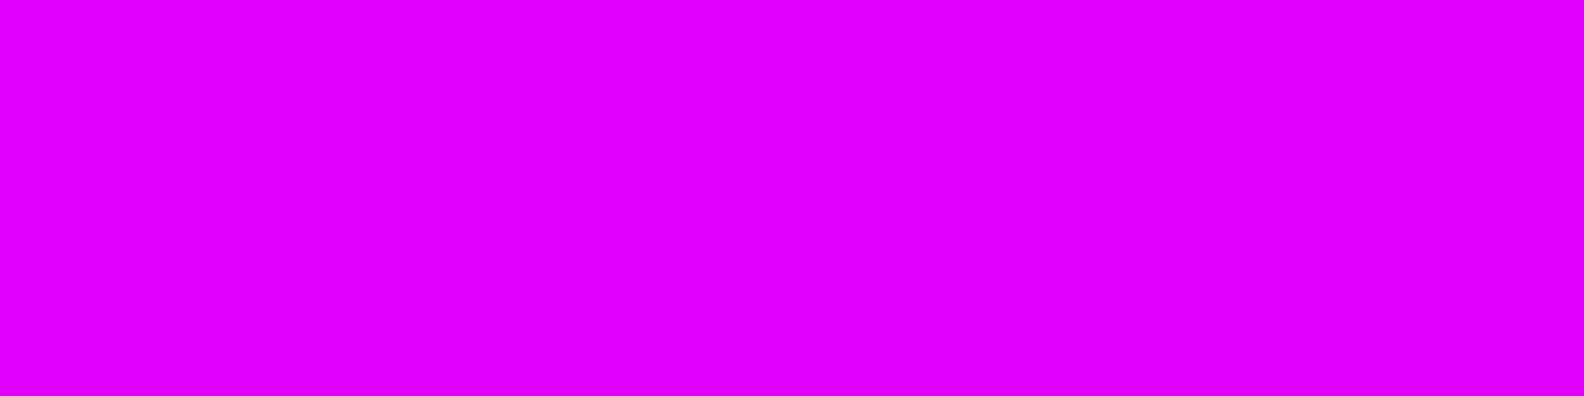 1584x396 Phlox Solid Color Background